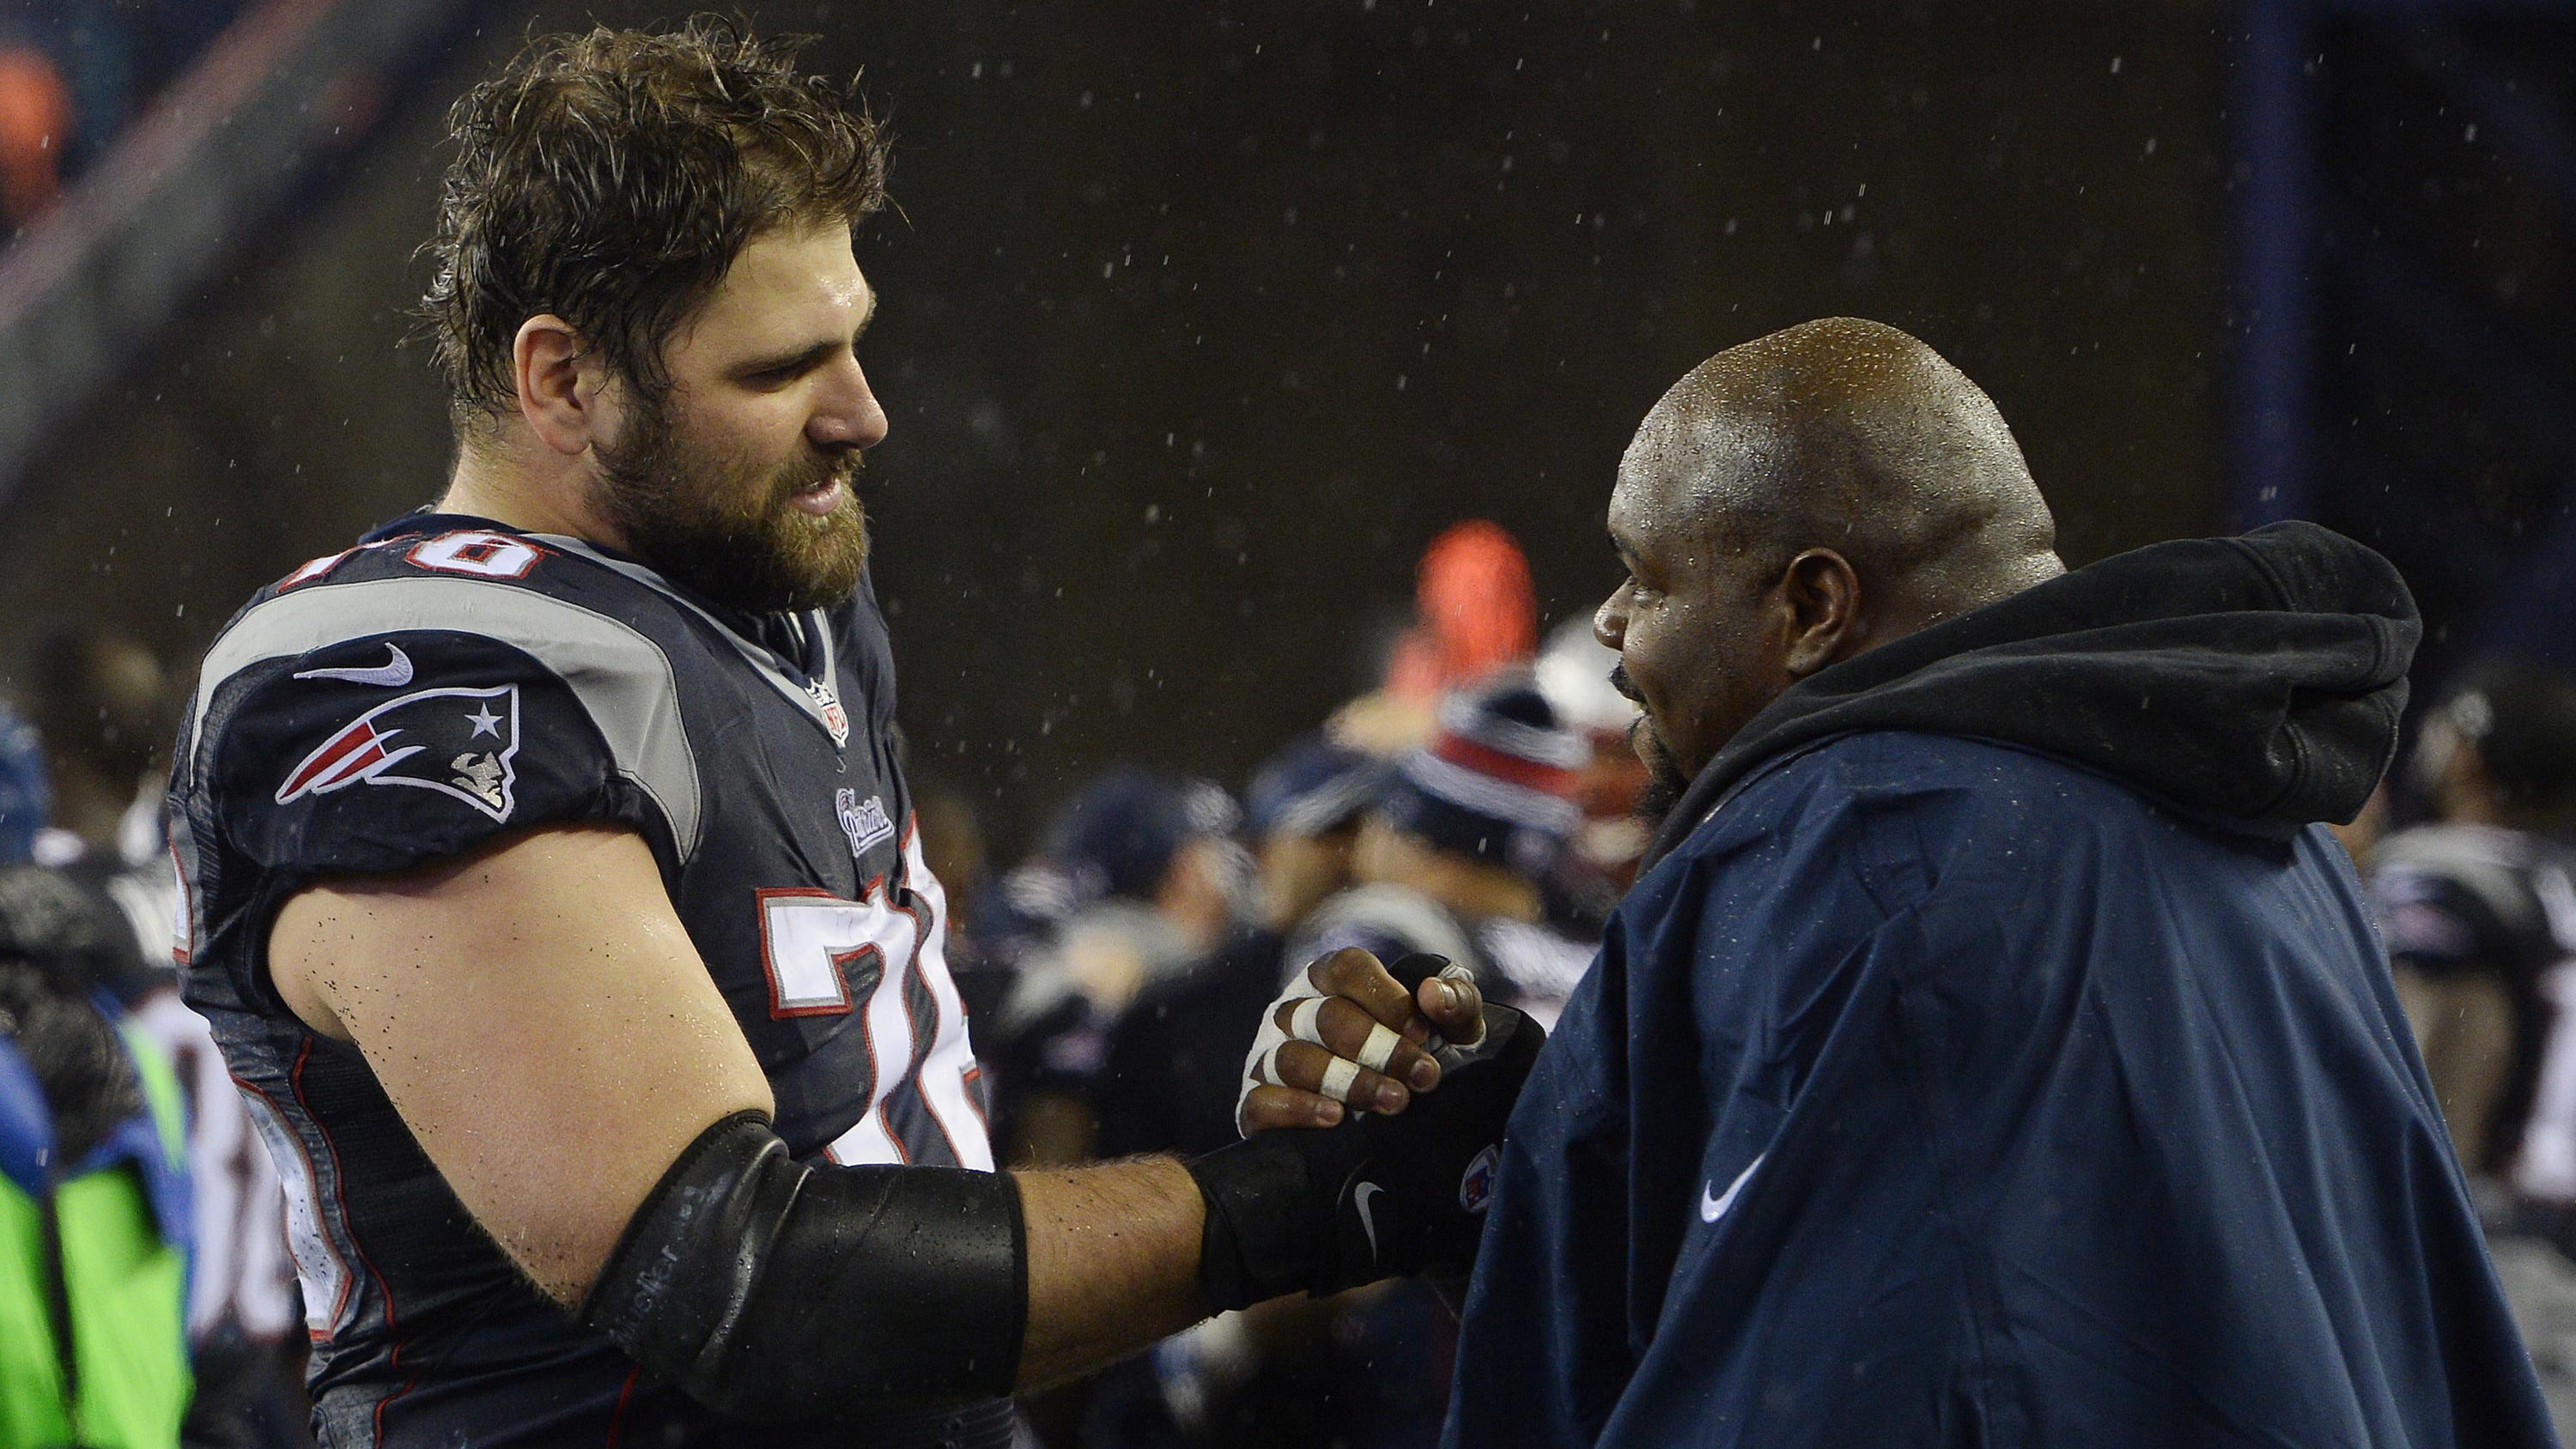 epa04567970 New England Patriots Sebastian Vollmer (L) and Vince Wilfork (R) celebrate after the AFC Championship game at Gillette Stadium in Foxborough, Massachusetts, USA, 18 January 2015. The Patriots defeated the Colts and will go on to face the 